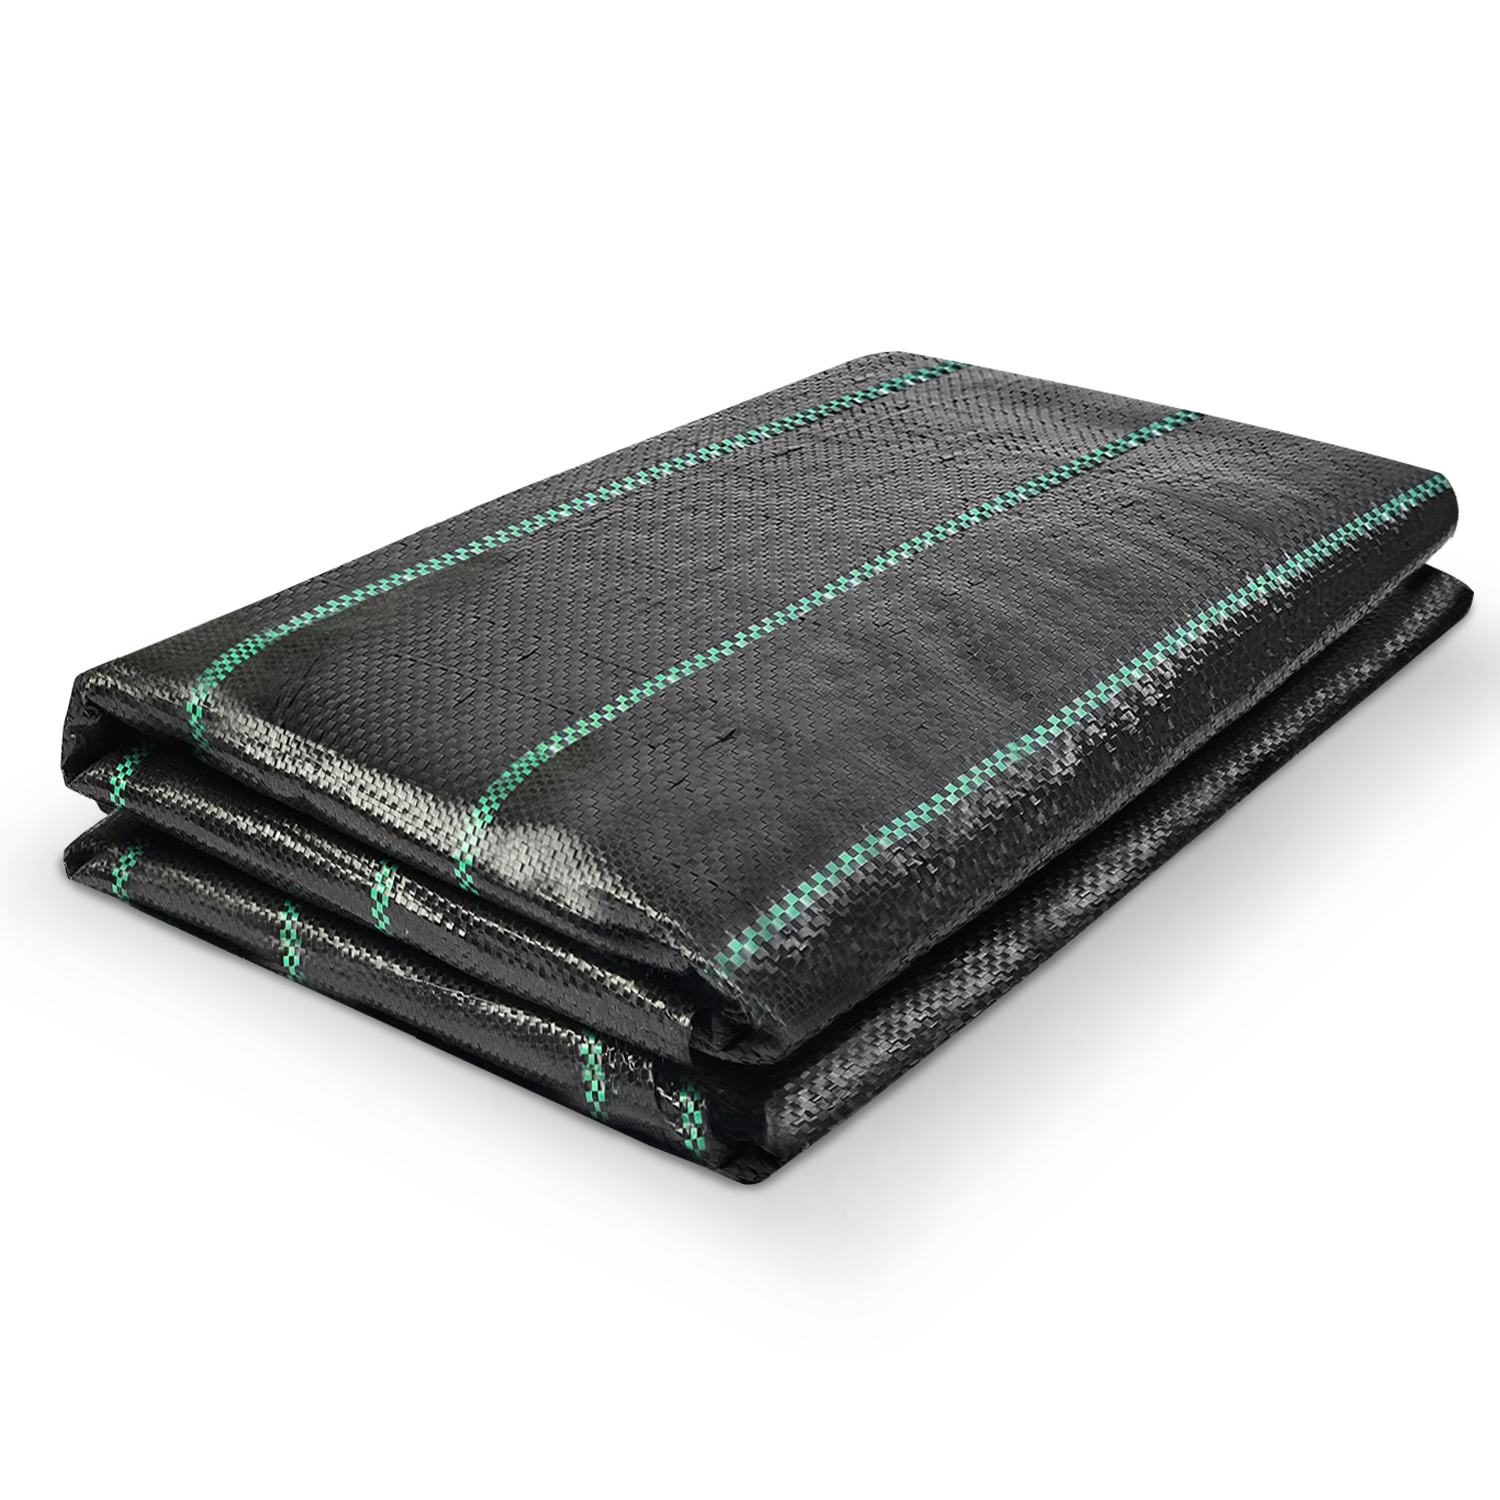 Heavy Duty Weed Control Membrane - Light Weight Fabric, Water Resistant and UV Protection